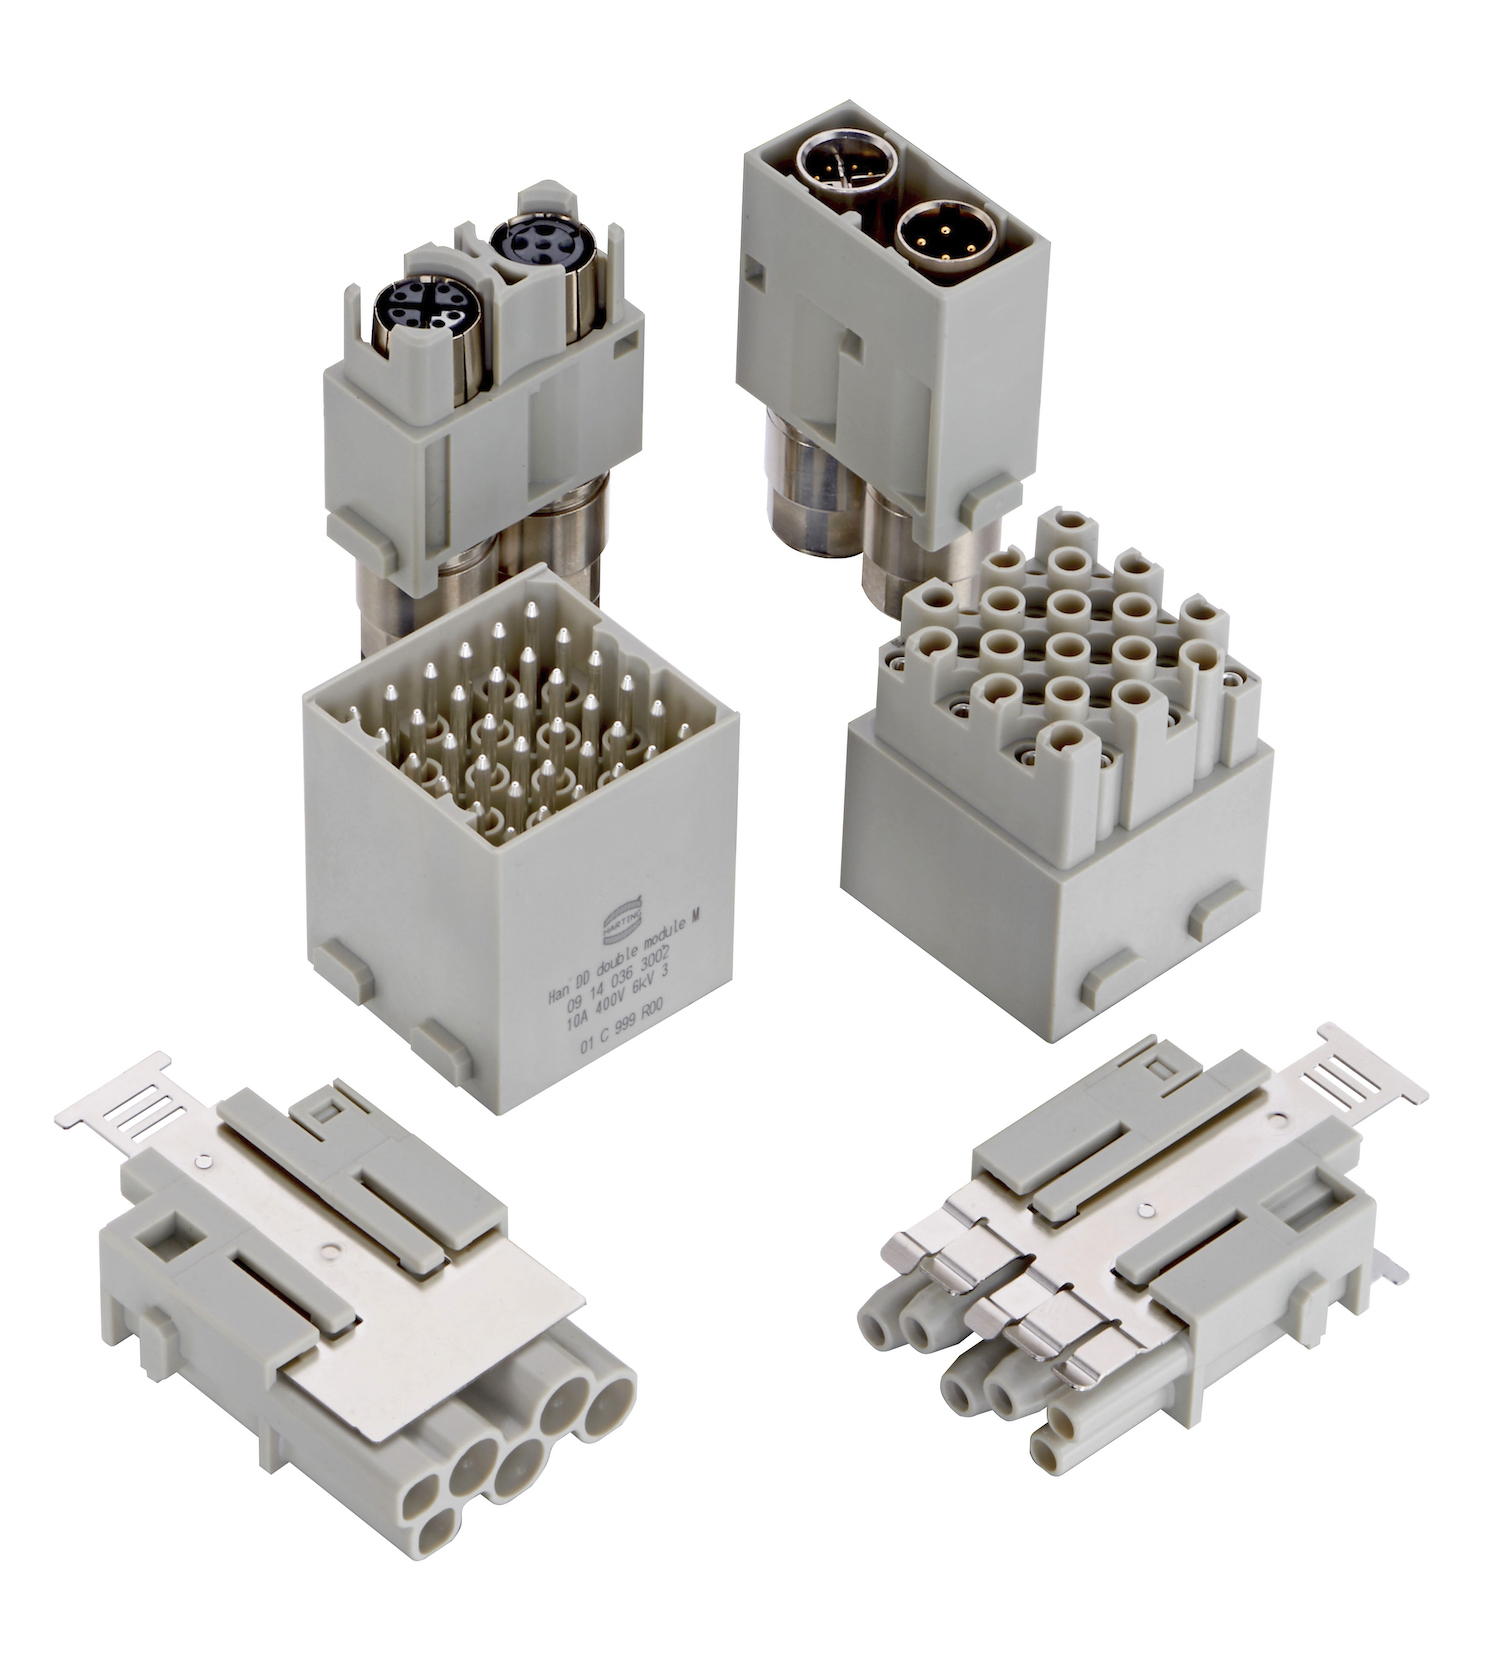 January 2020 New Connectivity Products: HARTING's newly extended Han-Modular connector portfolio